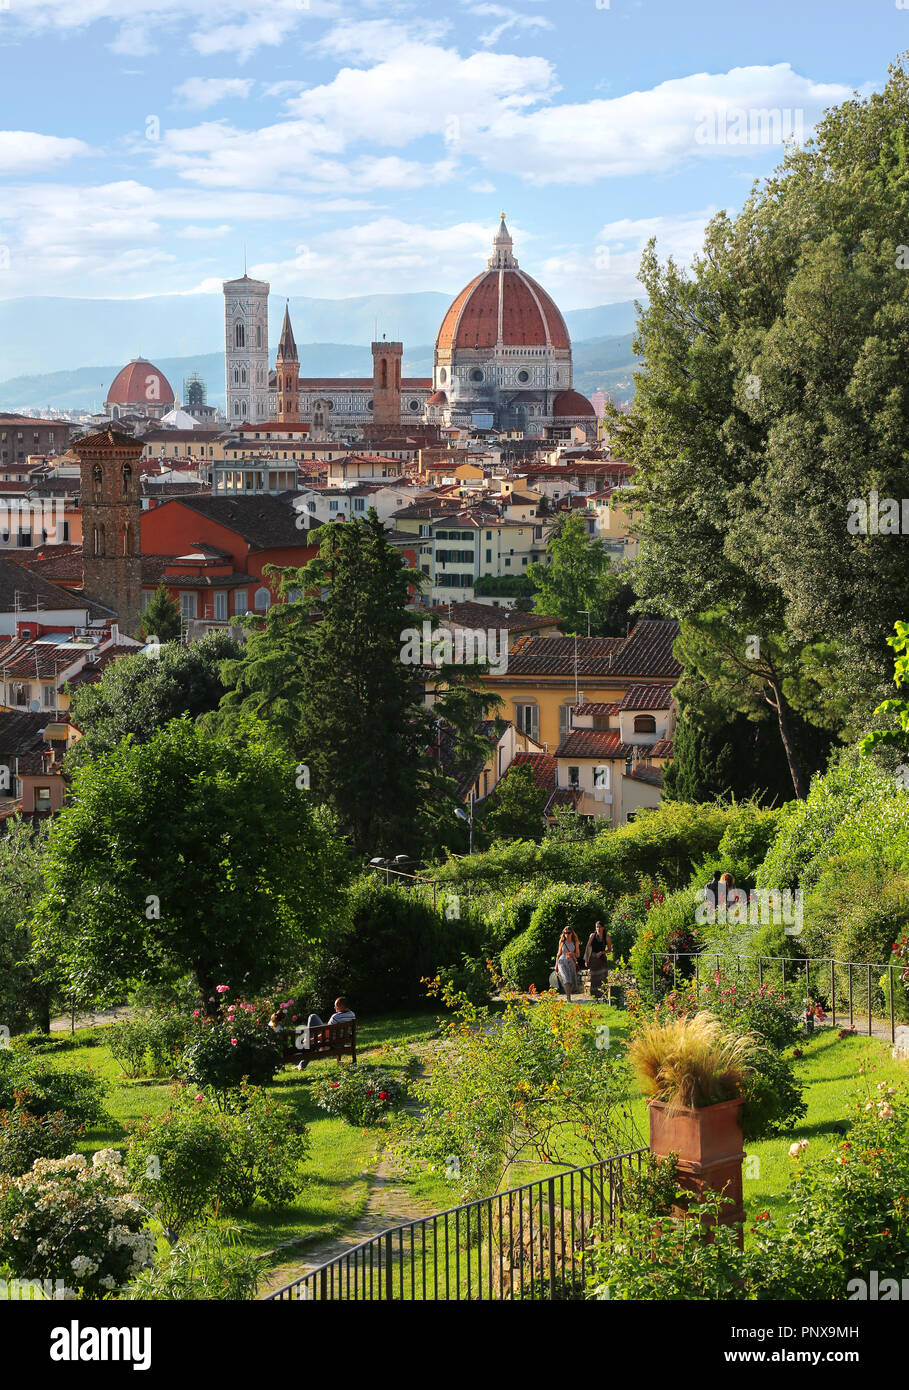 View of Duomo Santa Maria Del Fiore (Florence Cathedral) in evening as viewed from Piazzale Michelangelo in Florence (Firenze), Tuscany, Italy Stock Photo